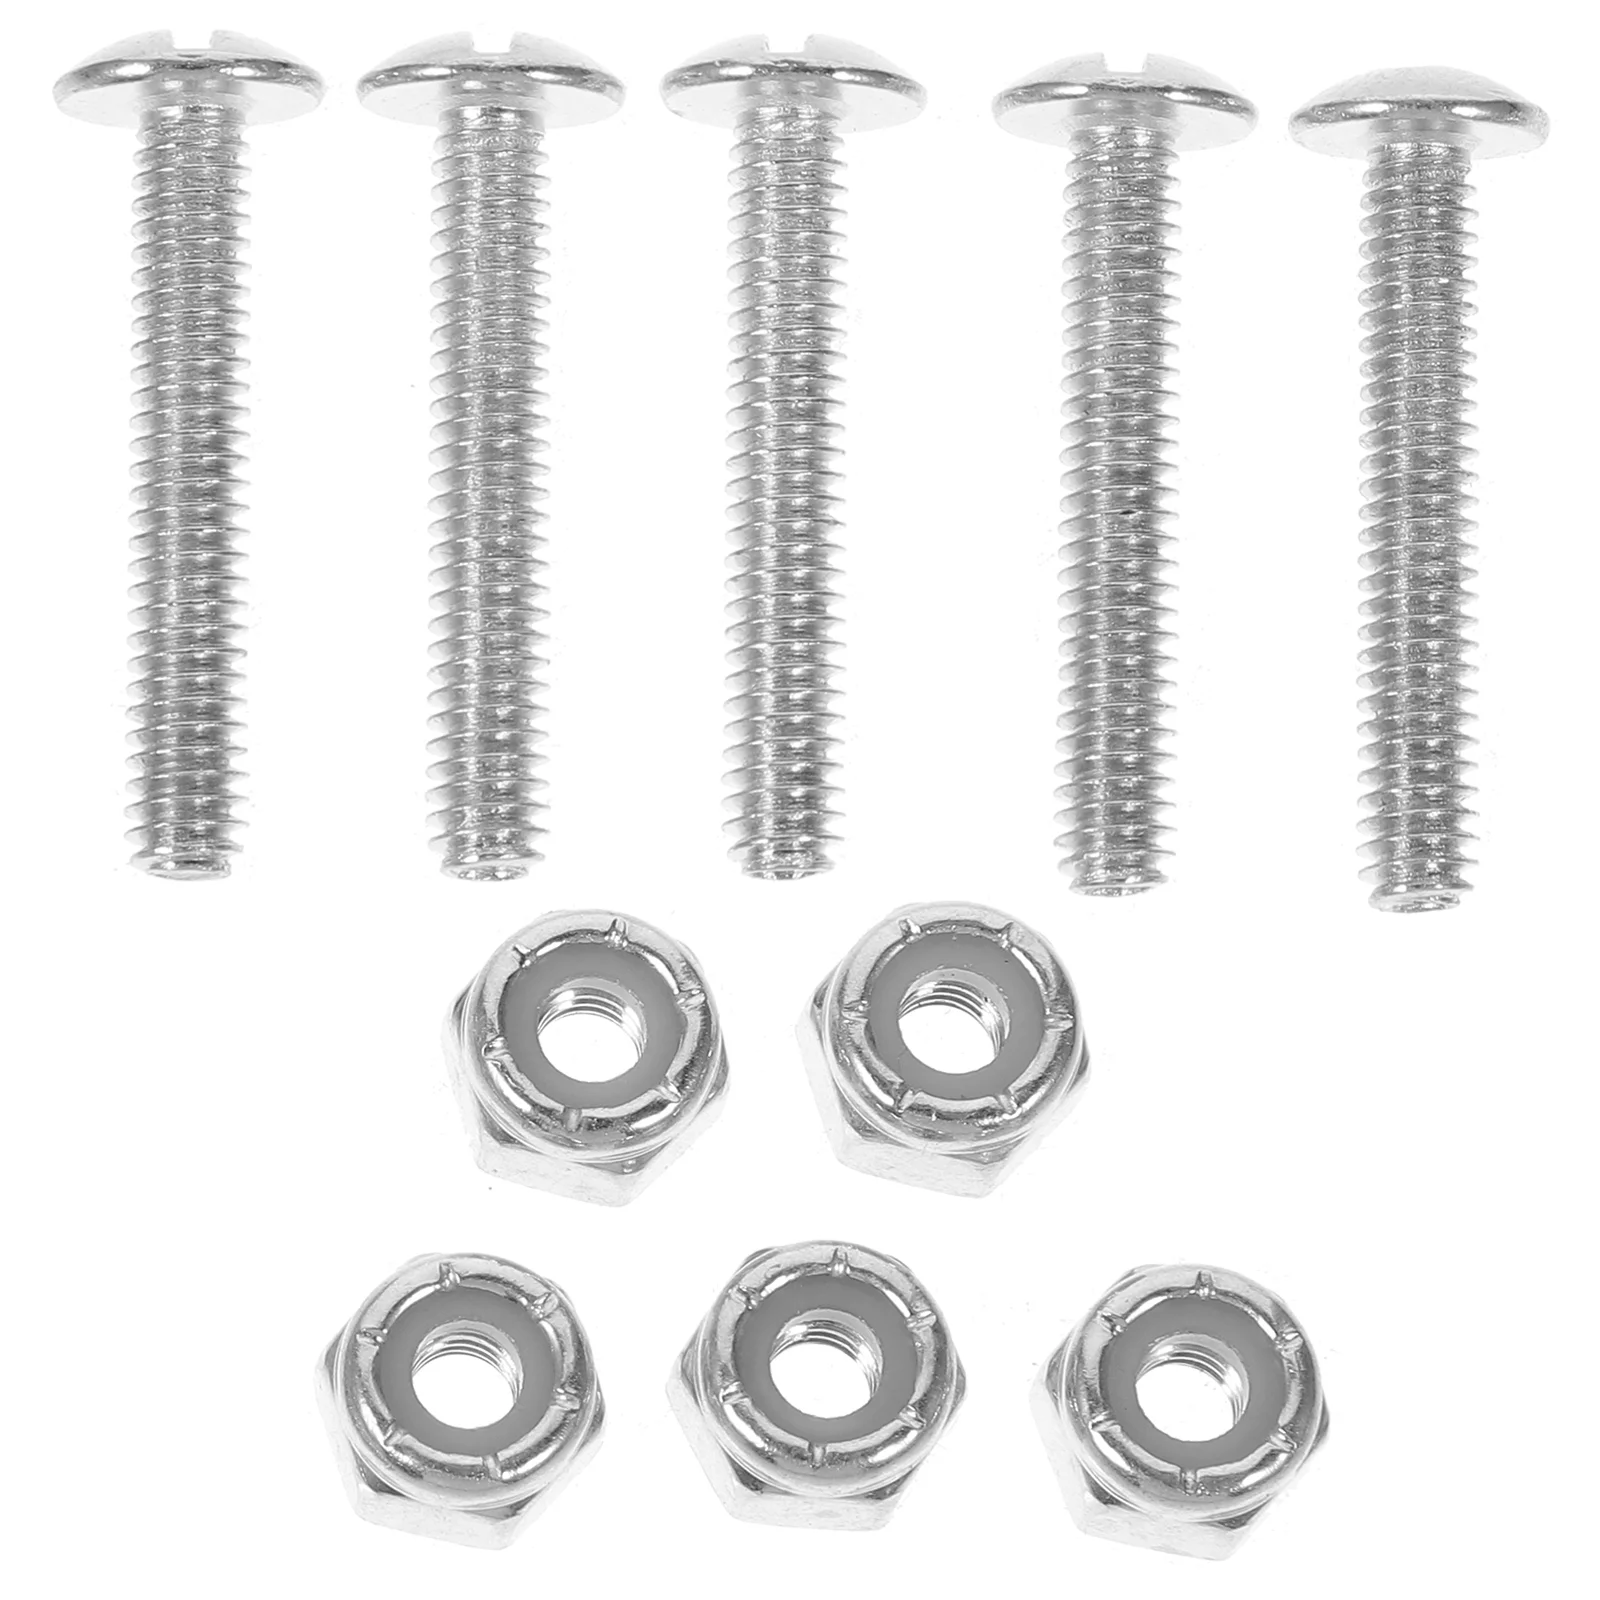 12 Pcs Table Football Screws Foosball Replacement Parts Nut Soccer Hardware Machine Nuts Galvanized Iron Accessories 30pcs 40x18mm bag corner screws clip edges protector metal bags purse strap belt tails clips plugs diy hardware accessories